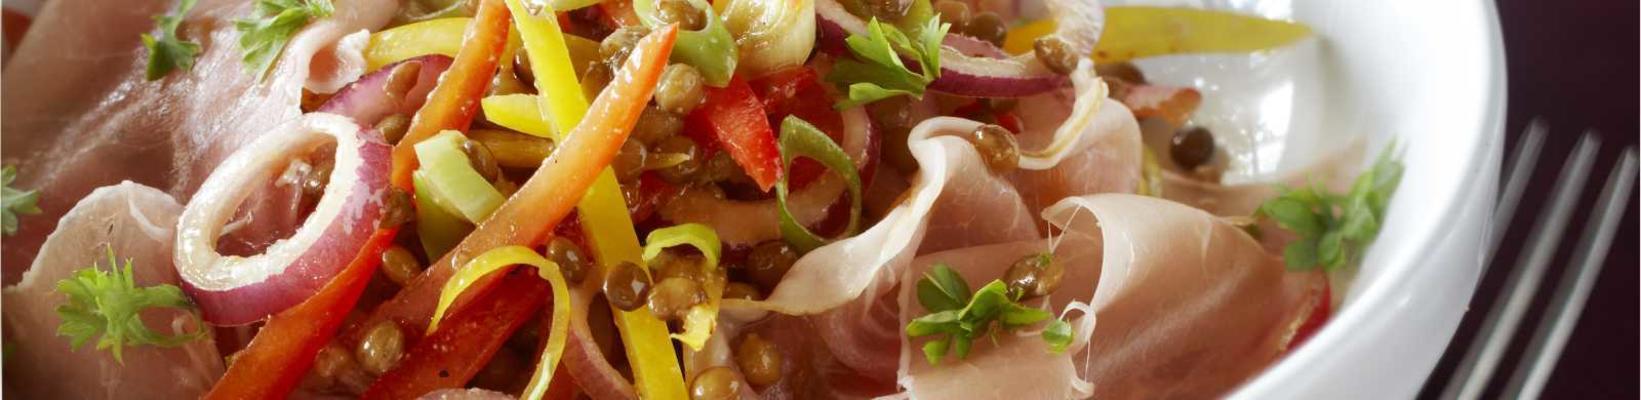 salad with lentils and raw ham